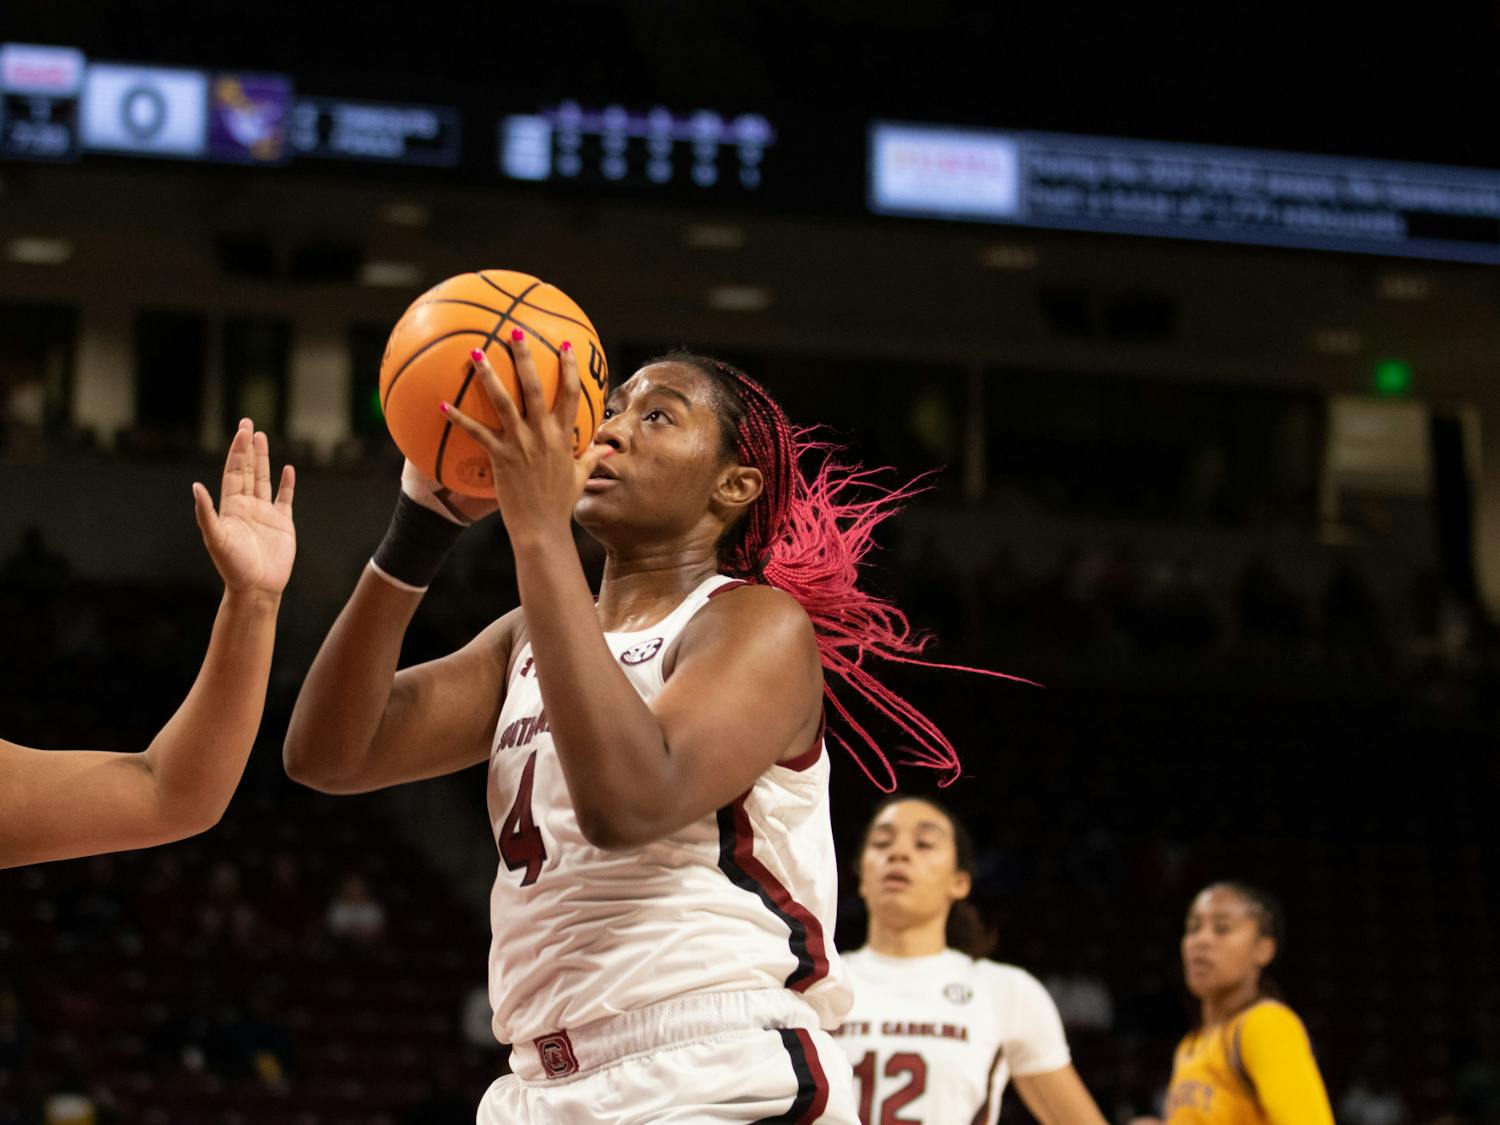 Senior forward Aliyah Boston holds the ball above her head and away from the player from Benedict College during the exhibition game at Colonial Life Arena on Oct. 31, 2022. South Carolina beat the Benedict Tigers in dominant fashion 123-32.